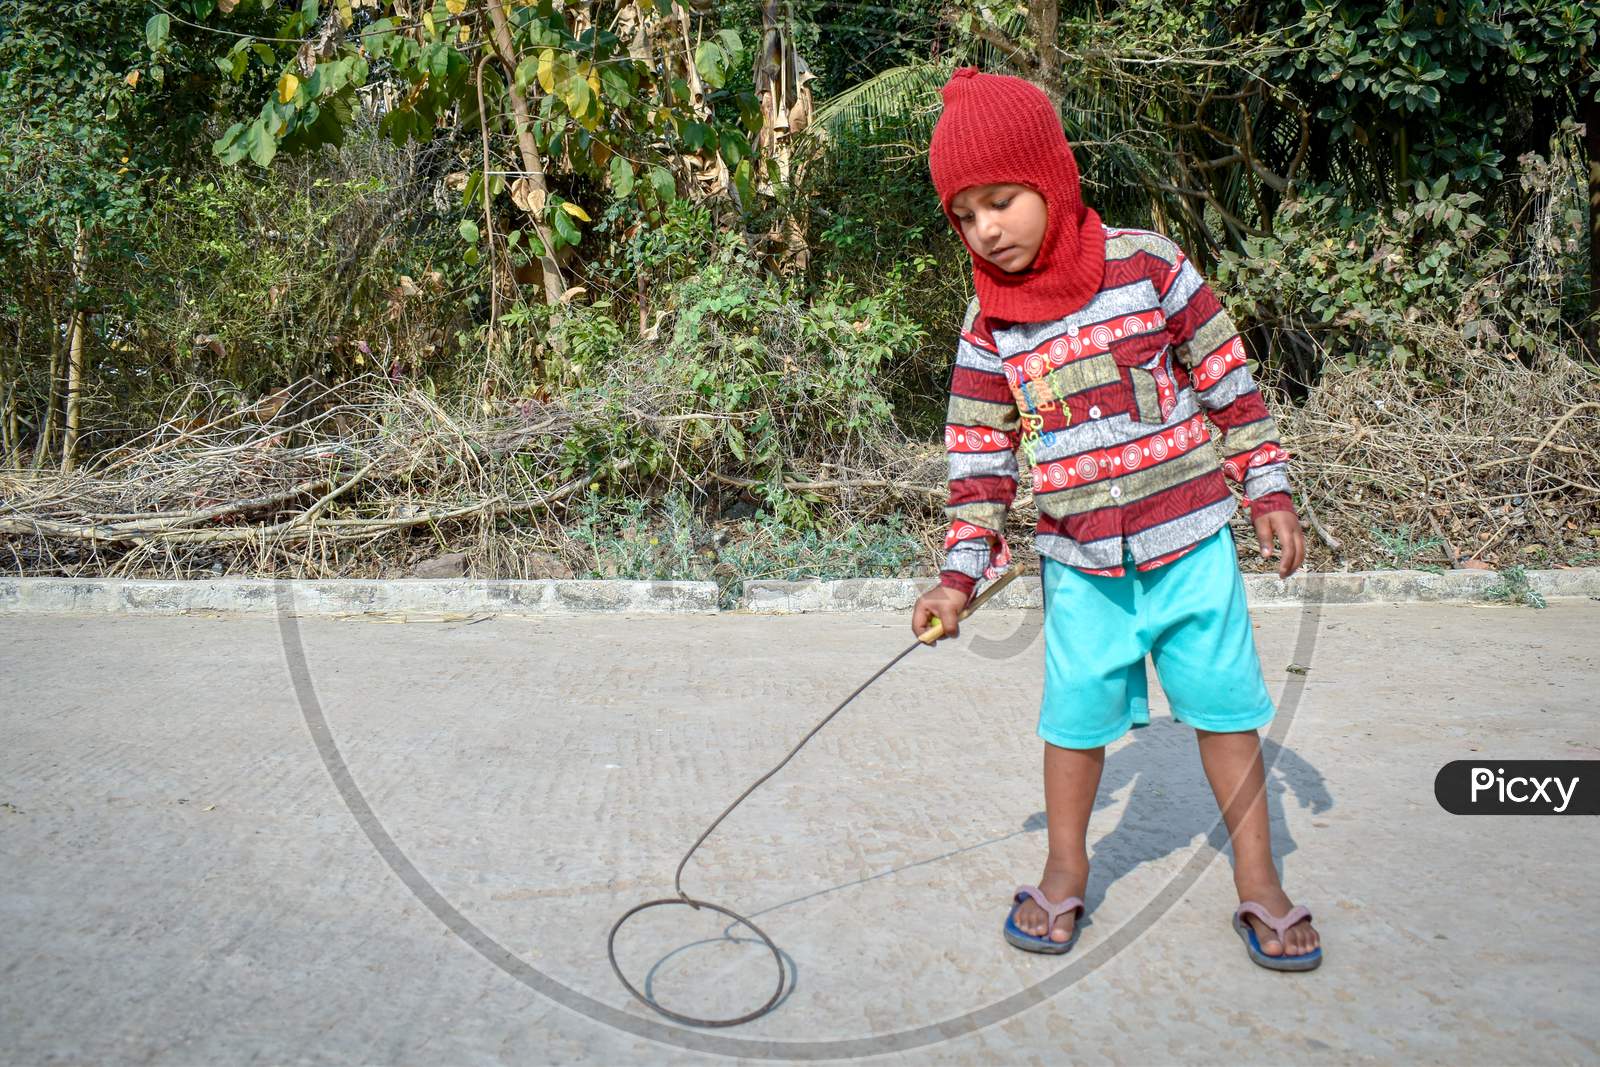 A 4-year-old poor child of a village is playing alone